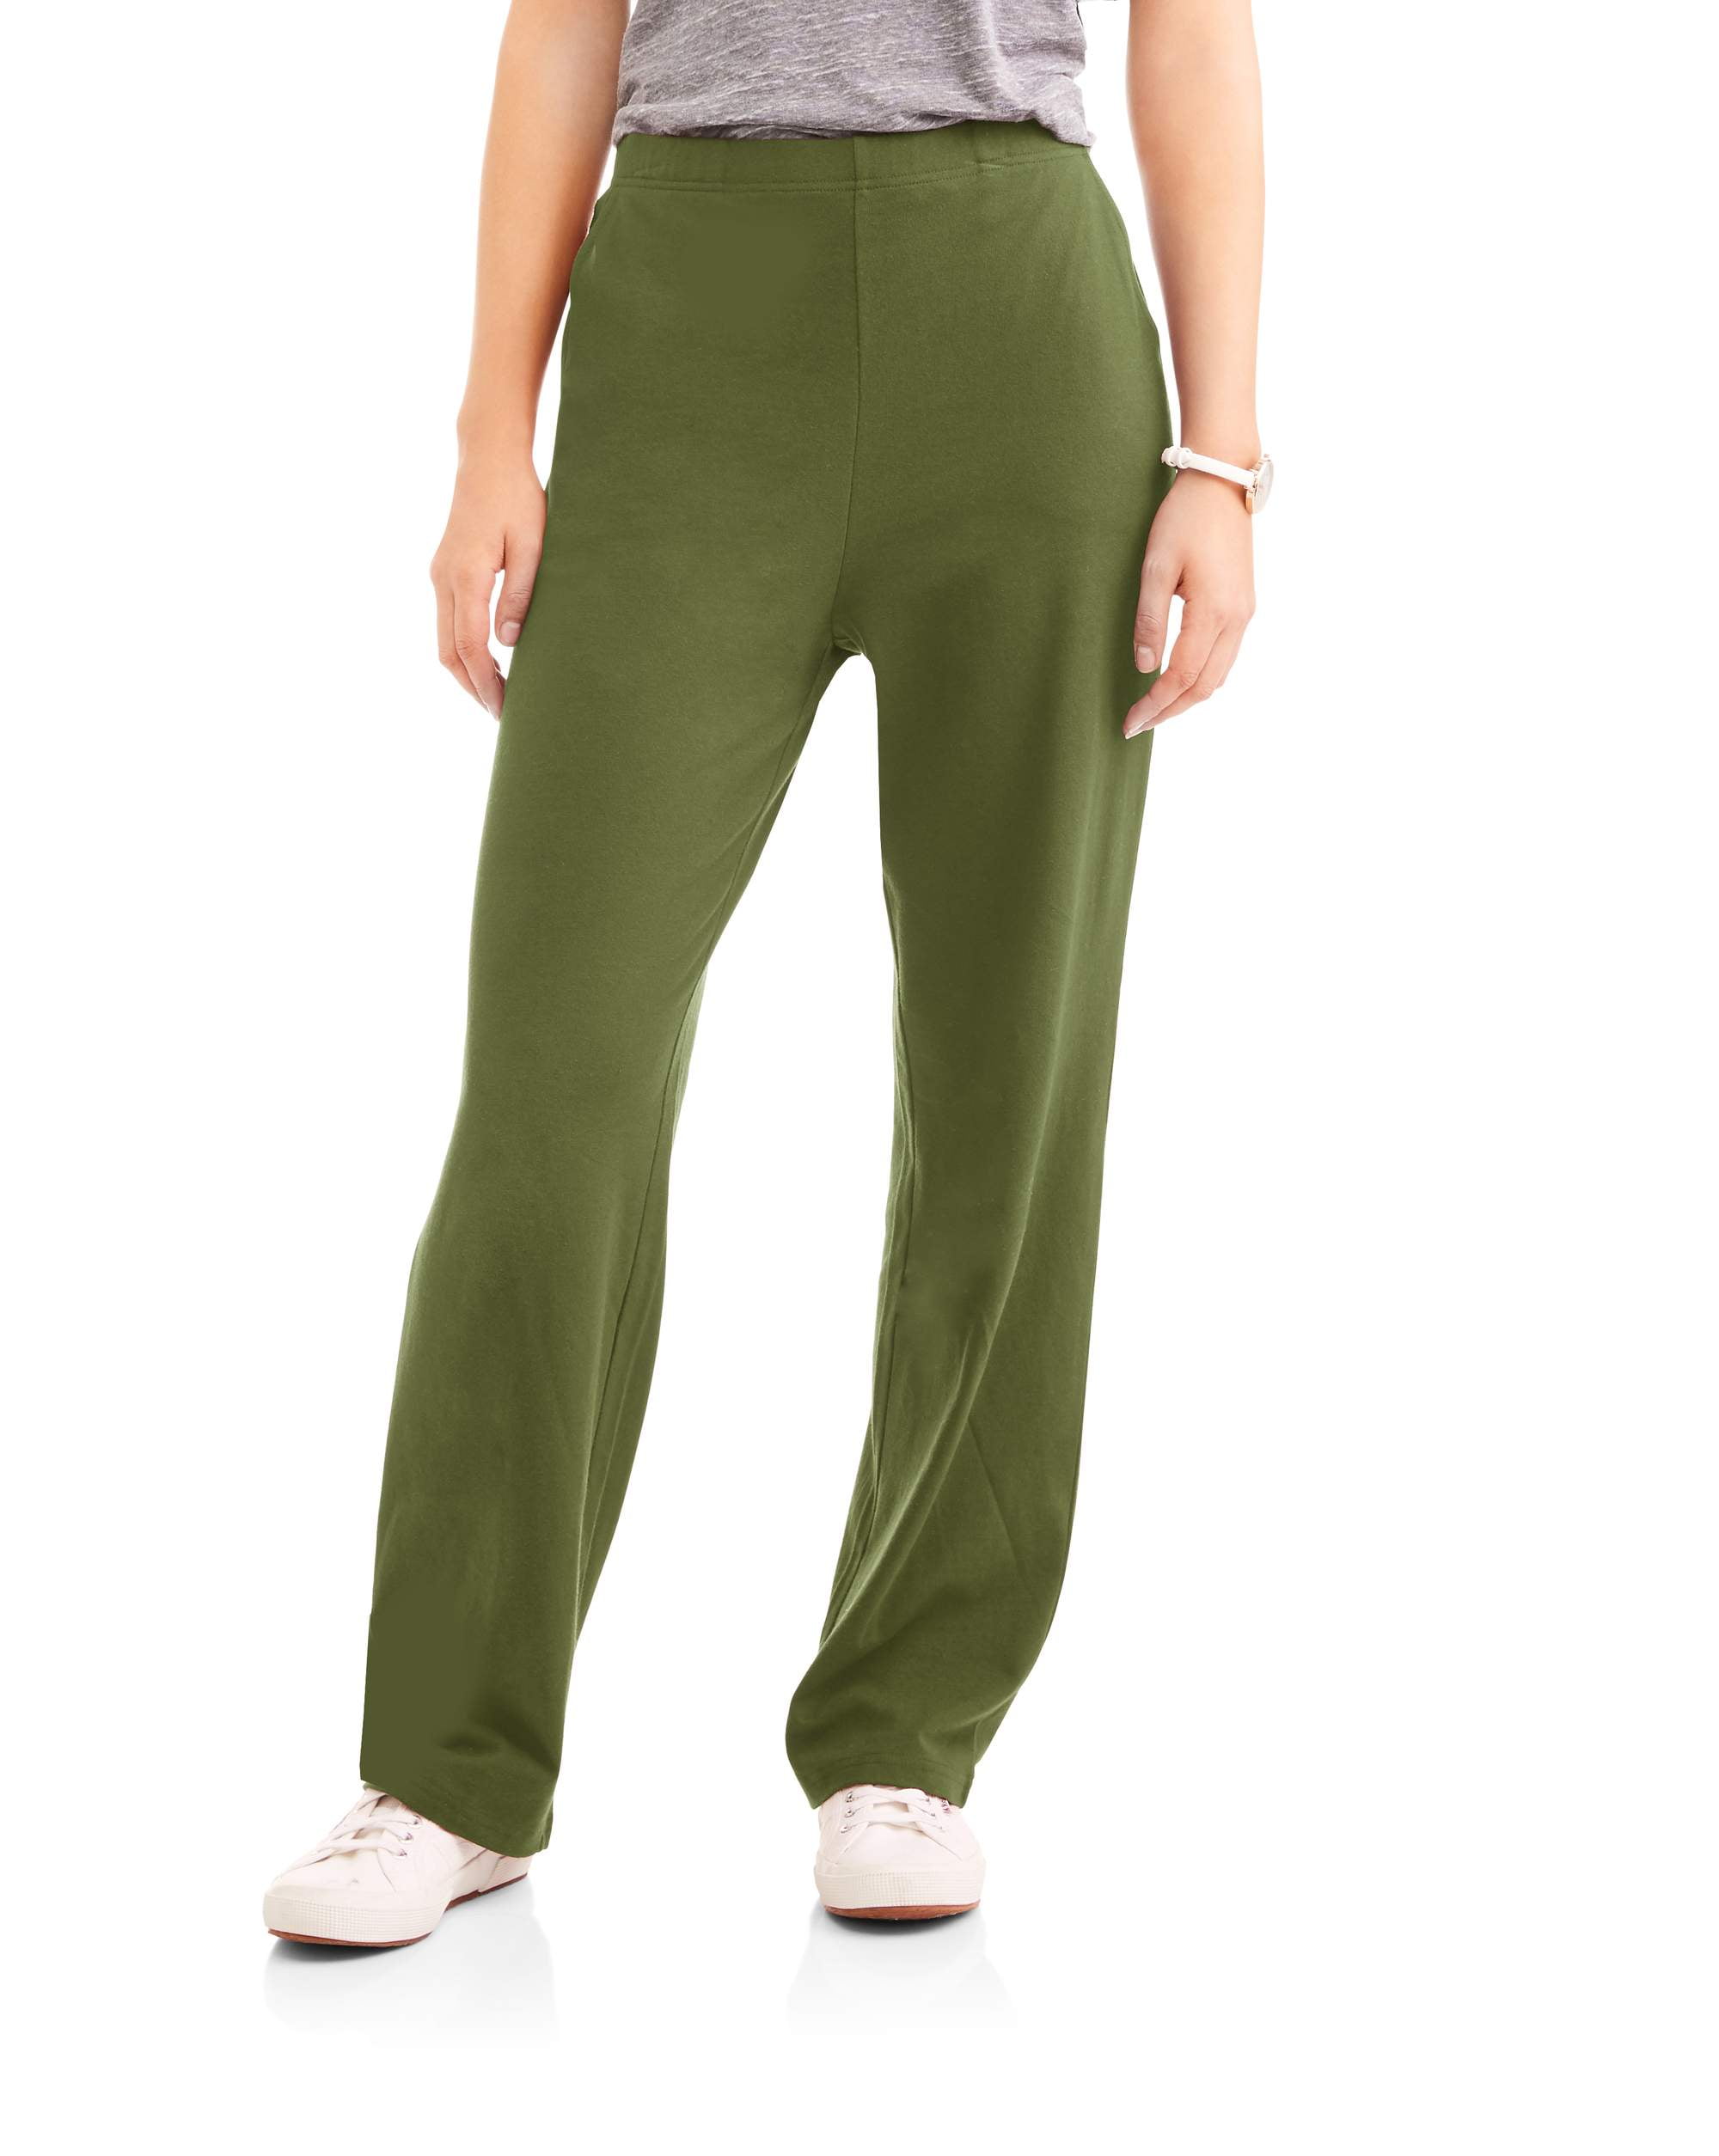 Women's Basic Knit Pull-On Pants Available in Regular and Petite 